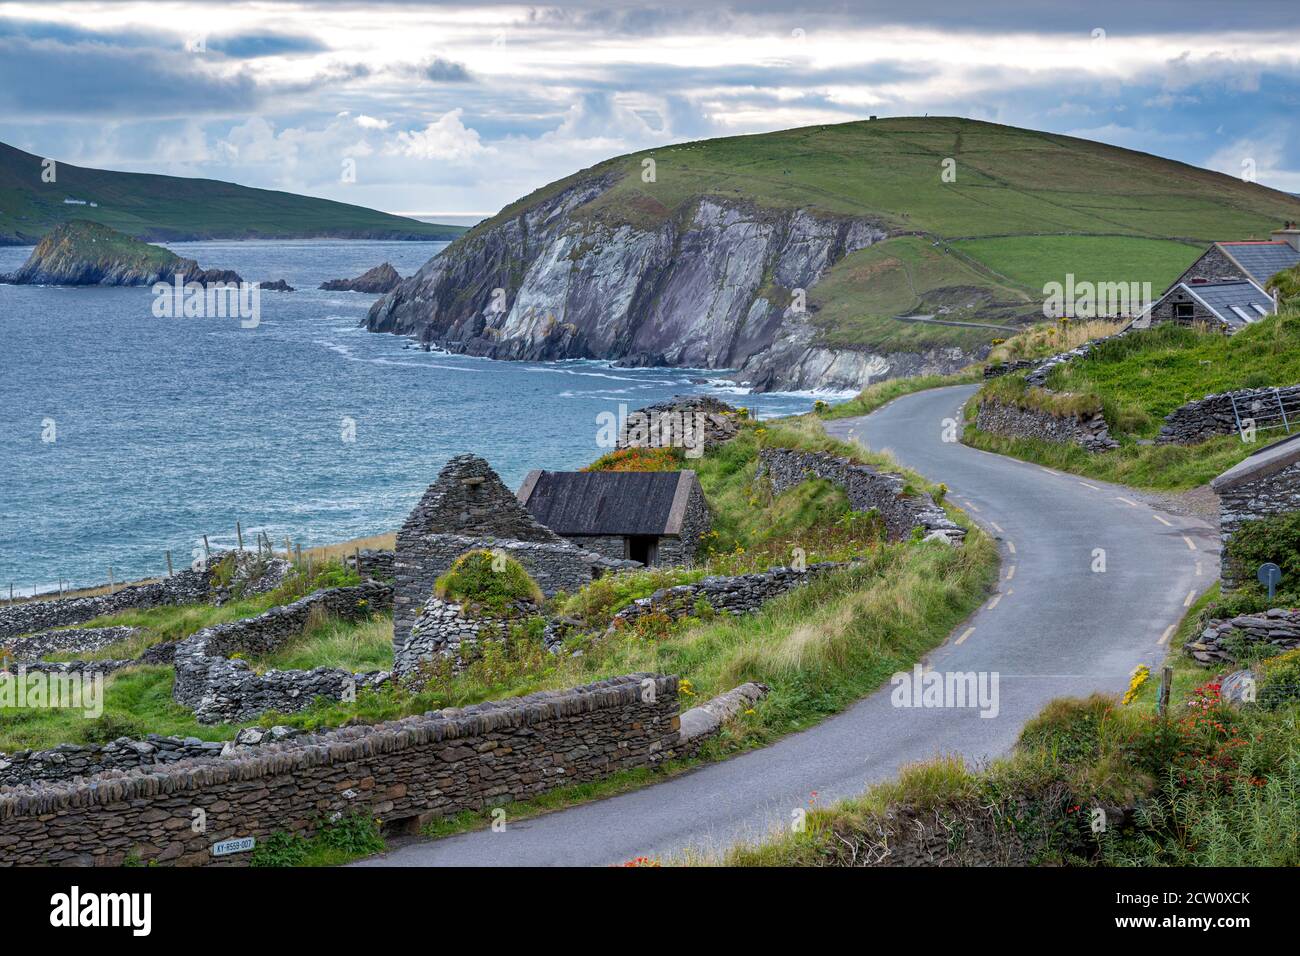 Evening over village of Coumeenoole along the coastline of the Dingle Peninsula, County Kerry, Republic of Ireland Stock Photo